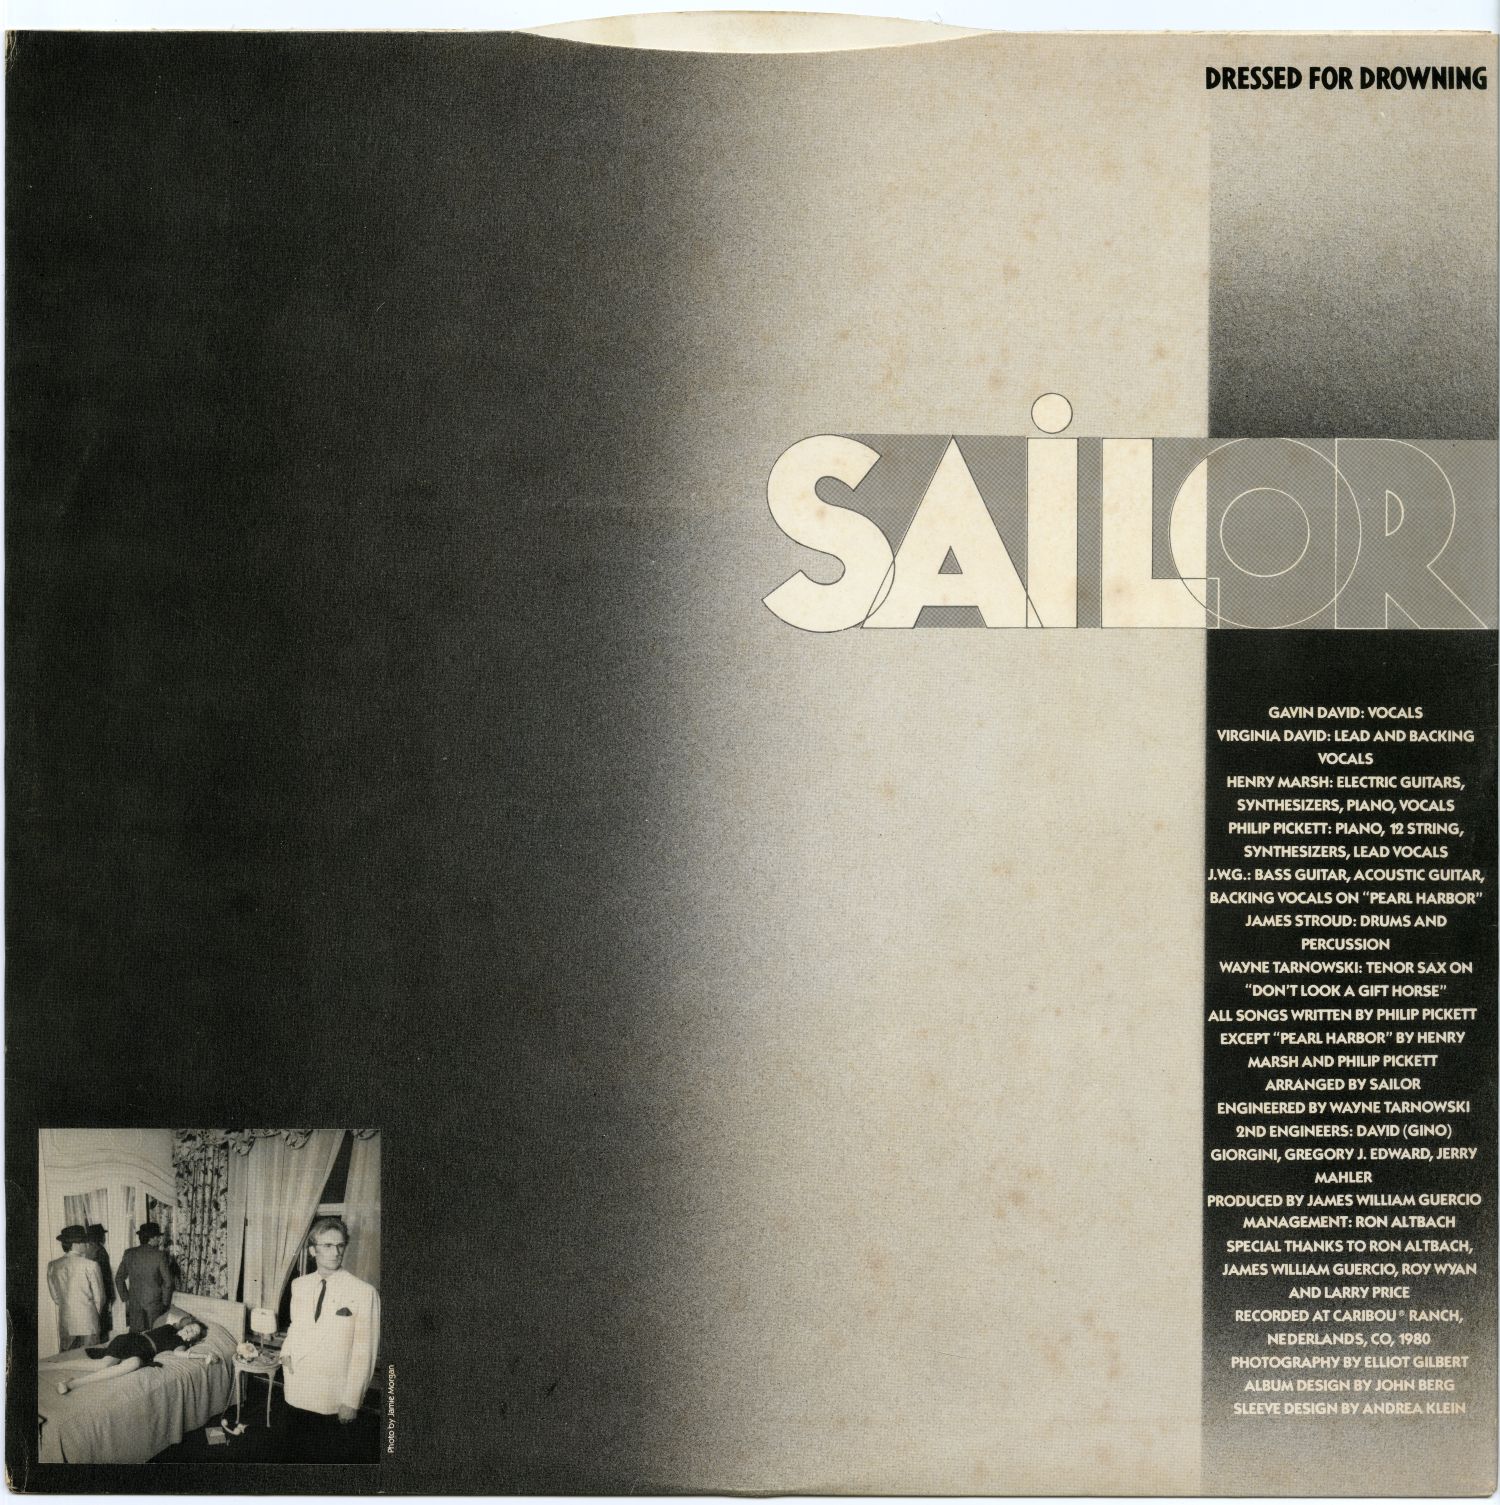 SAILOR『DRESSED FOR DROWNING』（1980年、Calibou Records）内袋01